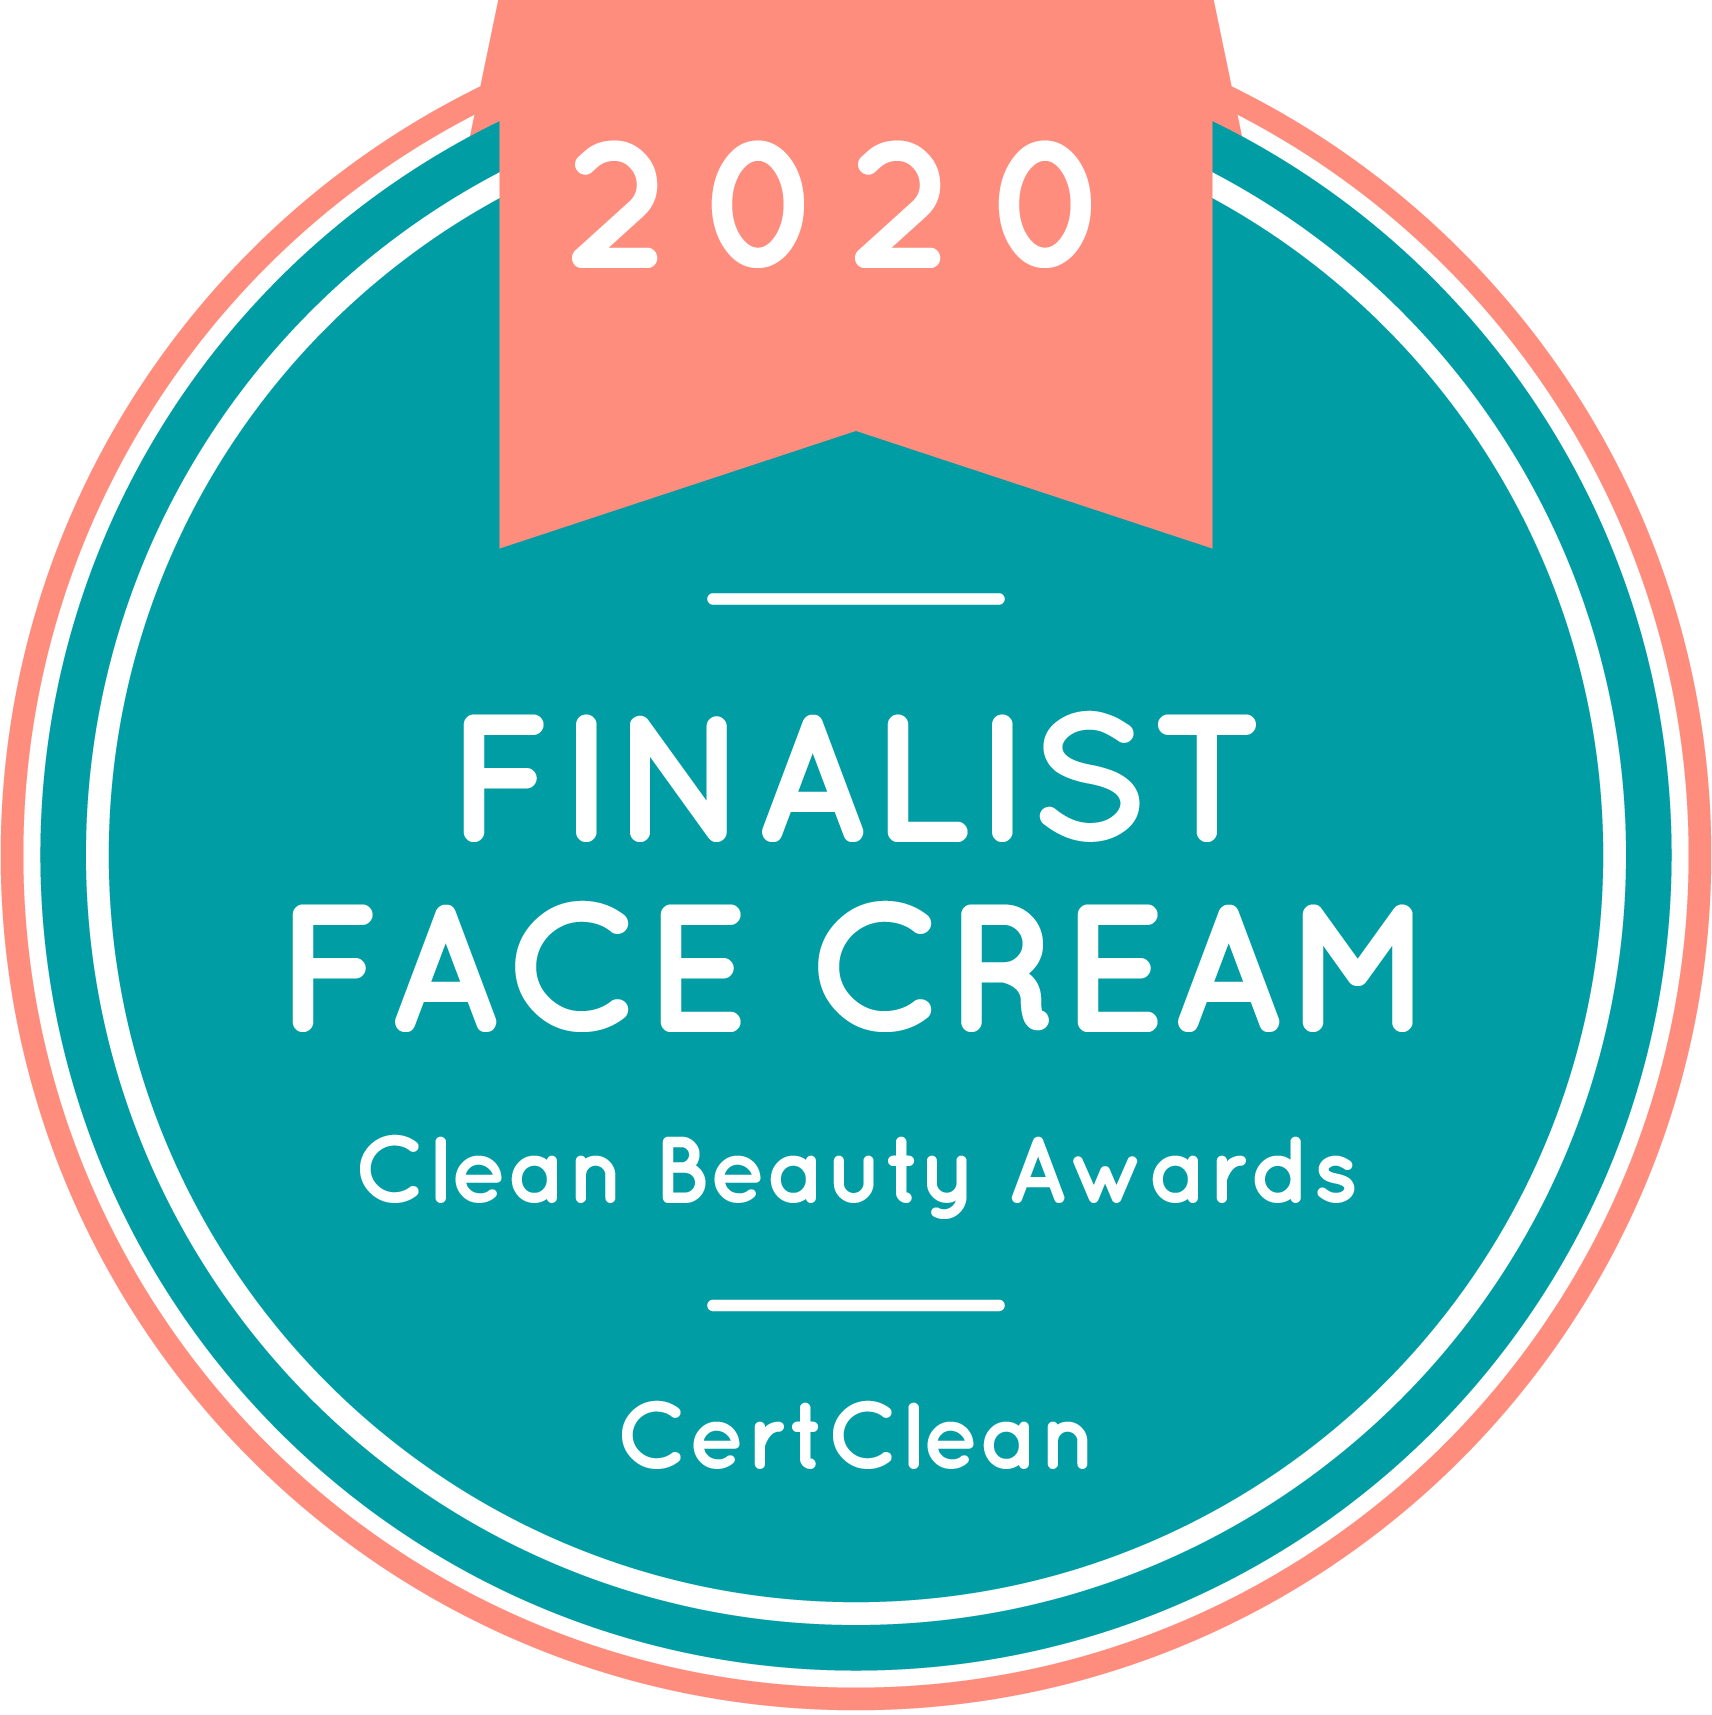 Iremia Skincare's Protective Cream is a Finalist in the 2020 Clean Beauty Awards for Best Face Cream.